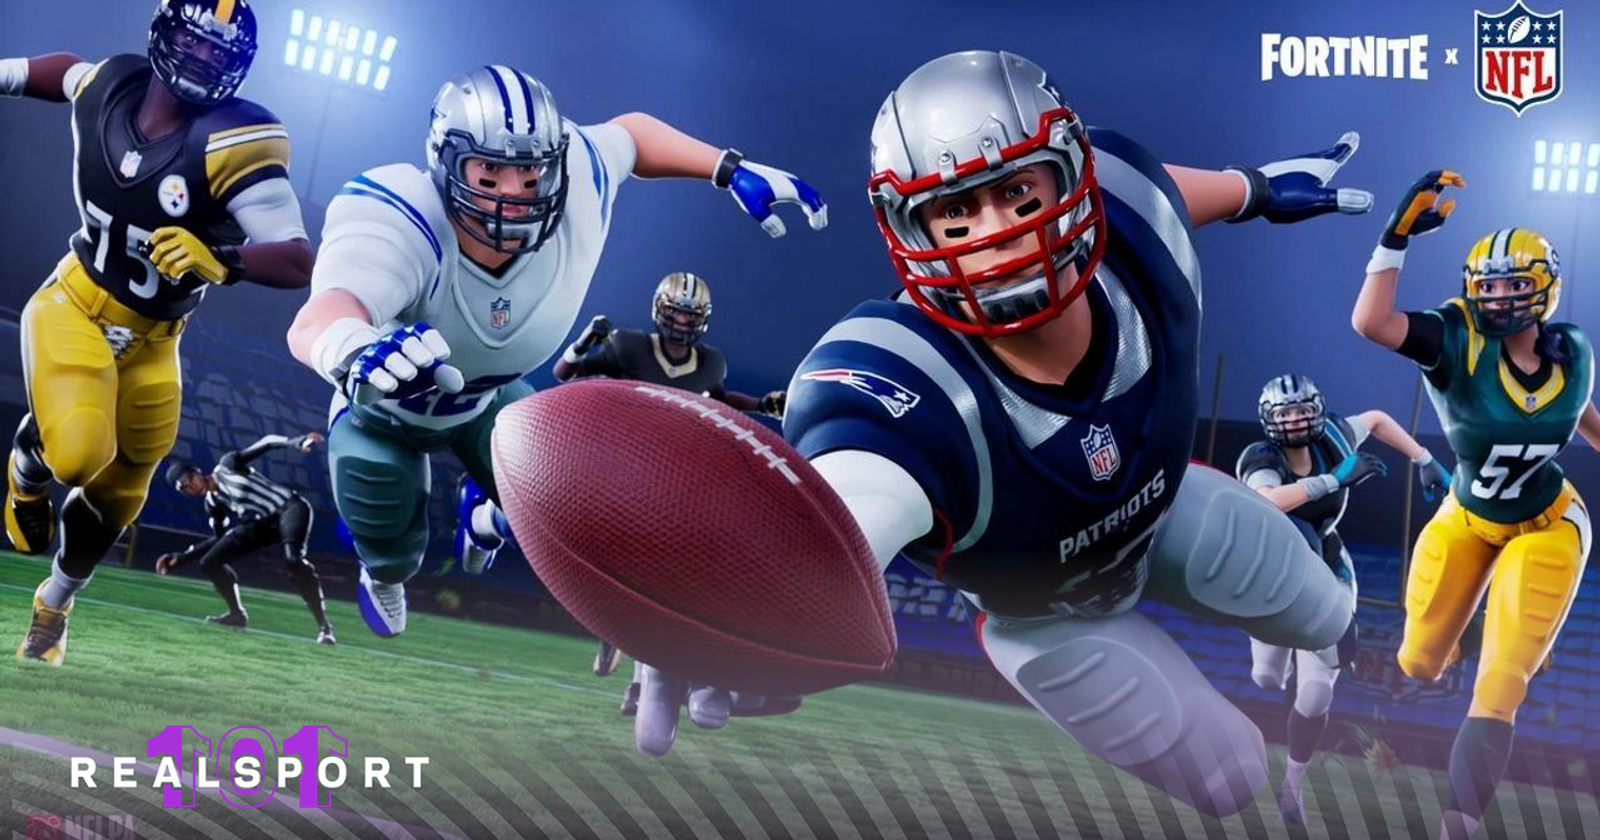 SuperTeam, NFLPA to Launch a Fortnite-Like Football Game